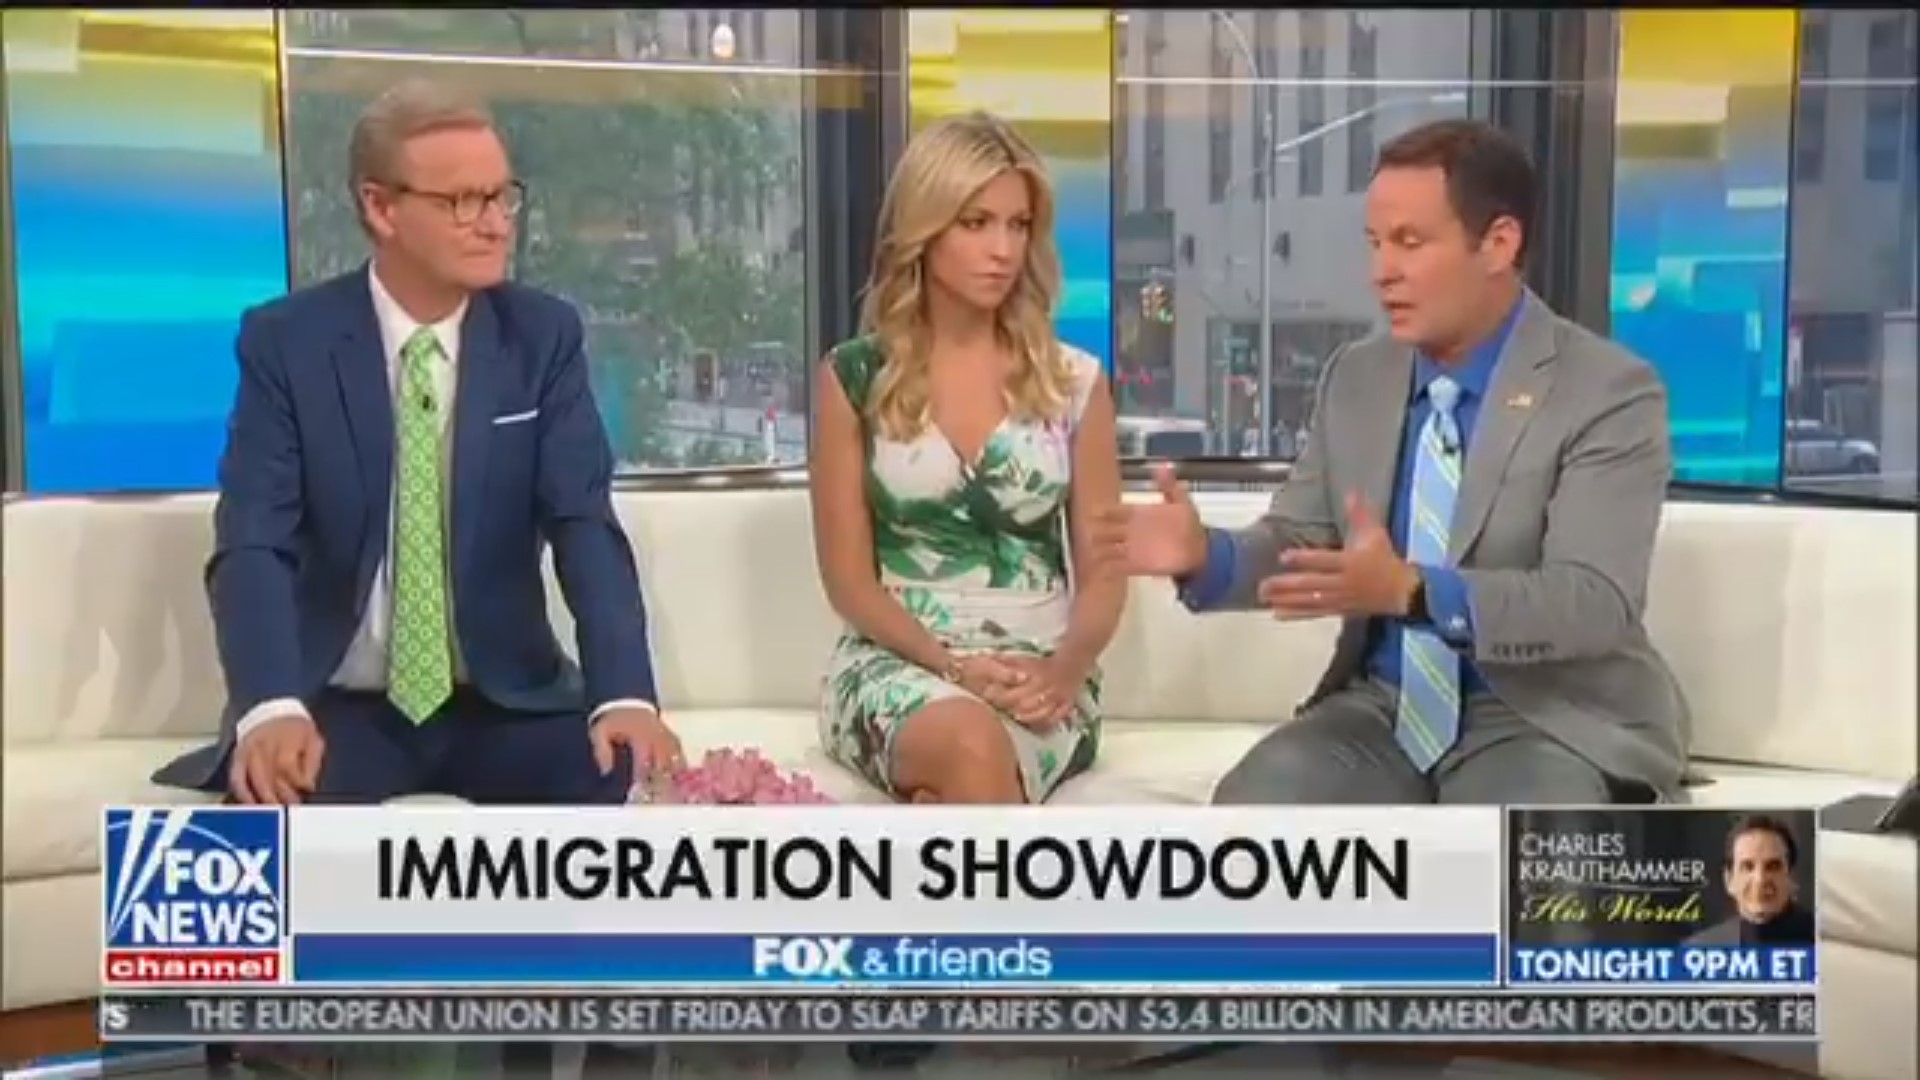 Fox’s Brian Kilmeade Faces Intense Backlash For Saying Migrant Children ‘Are Not Our Kids’